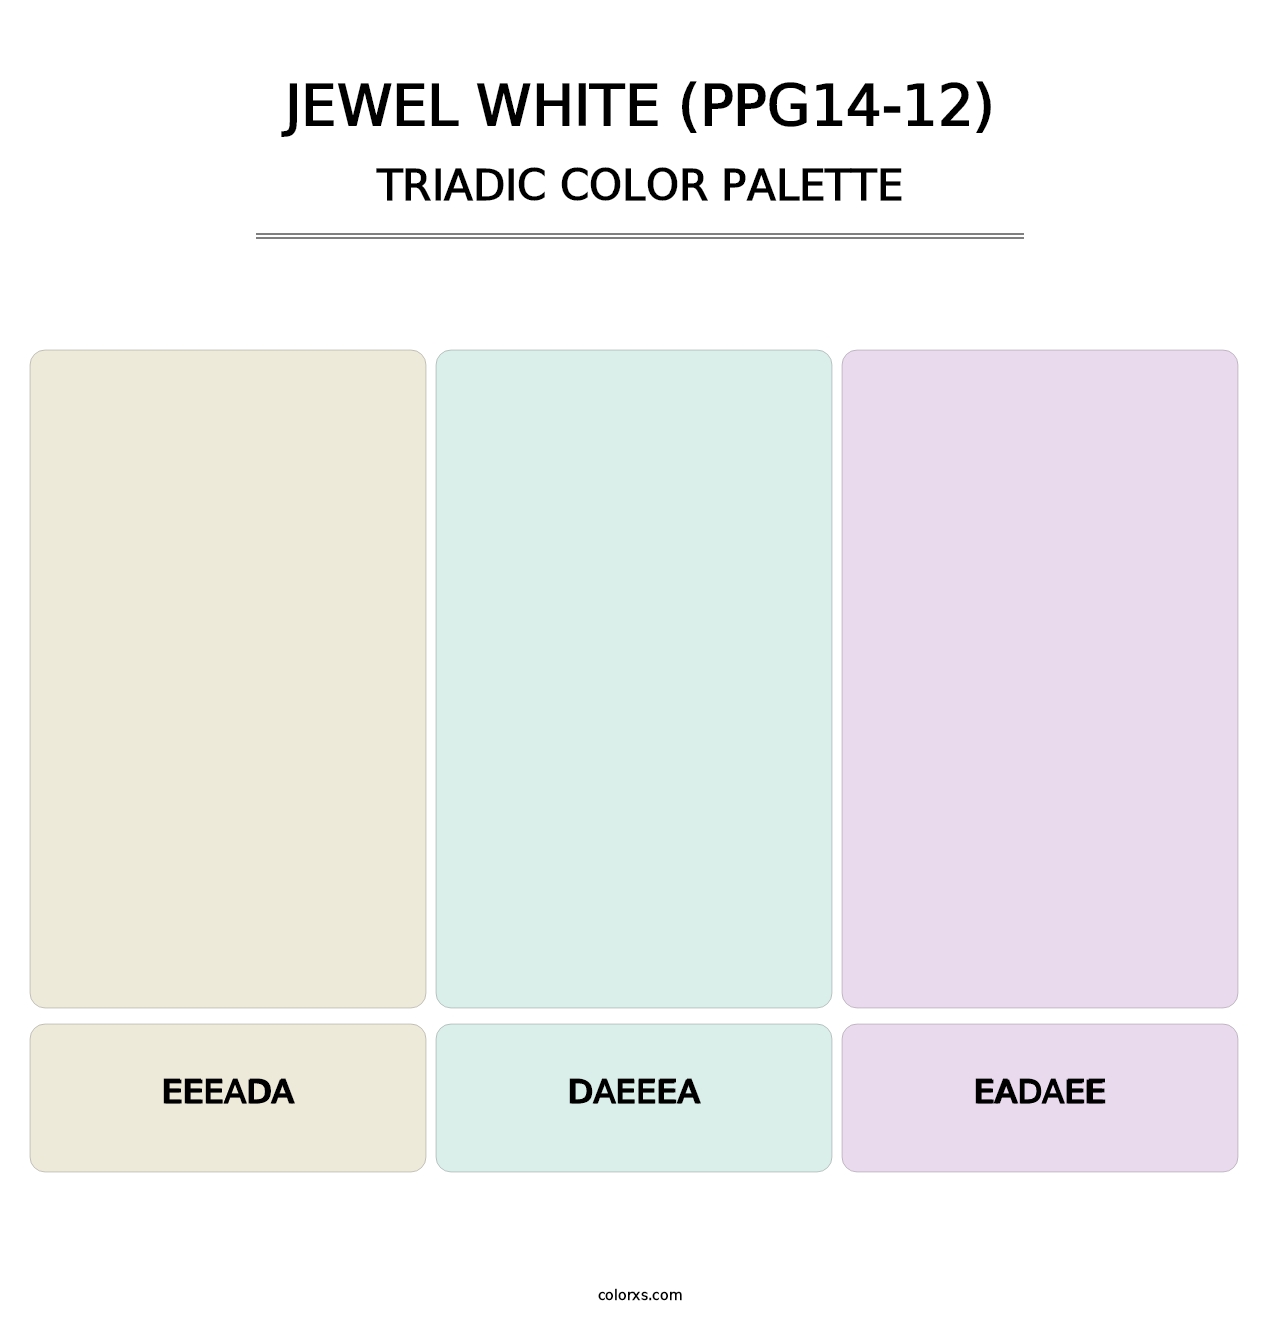 Jewel White (PPG14-12) - Triadic Color Palette